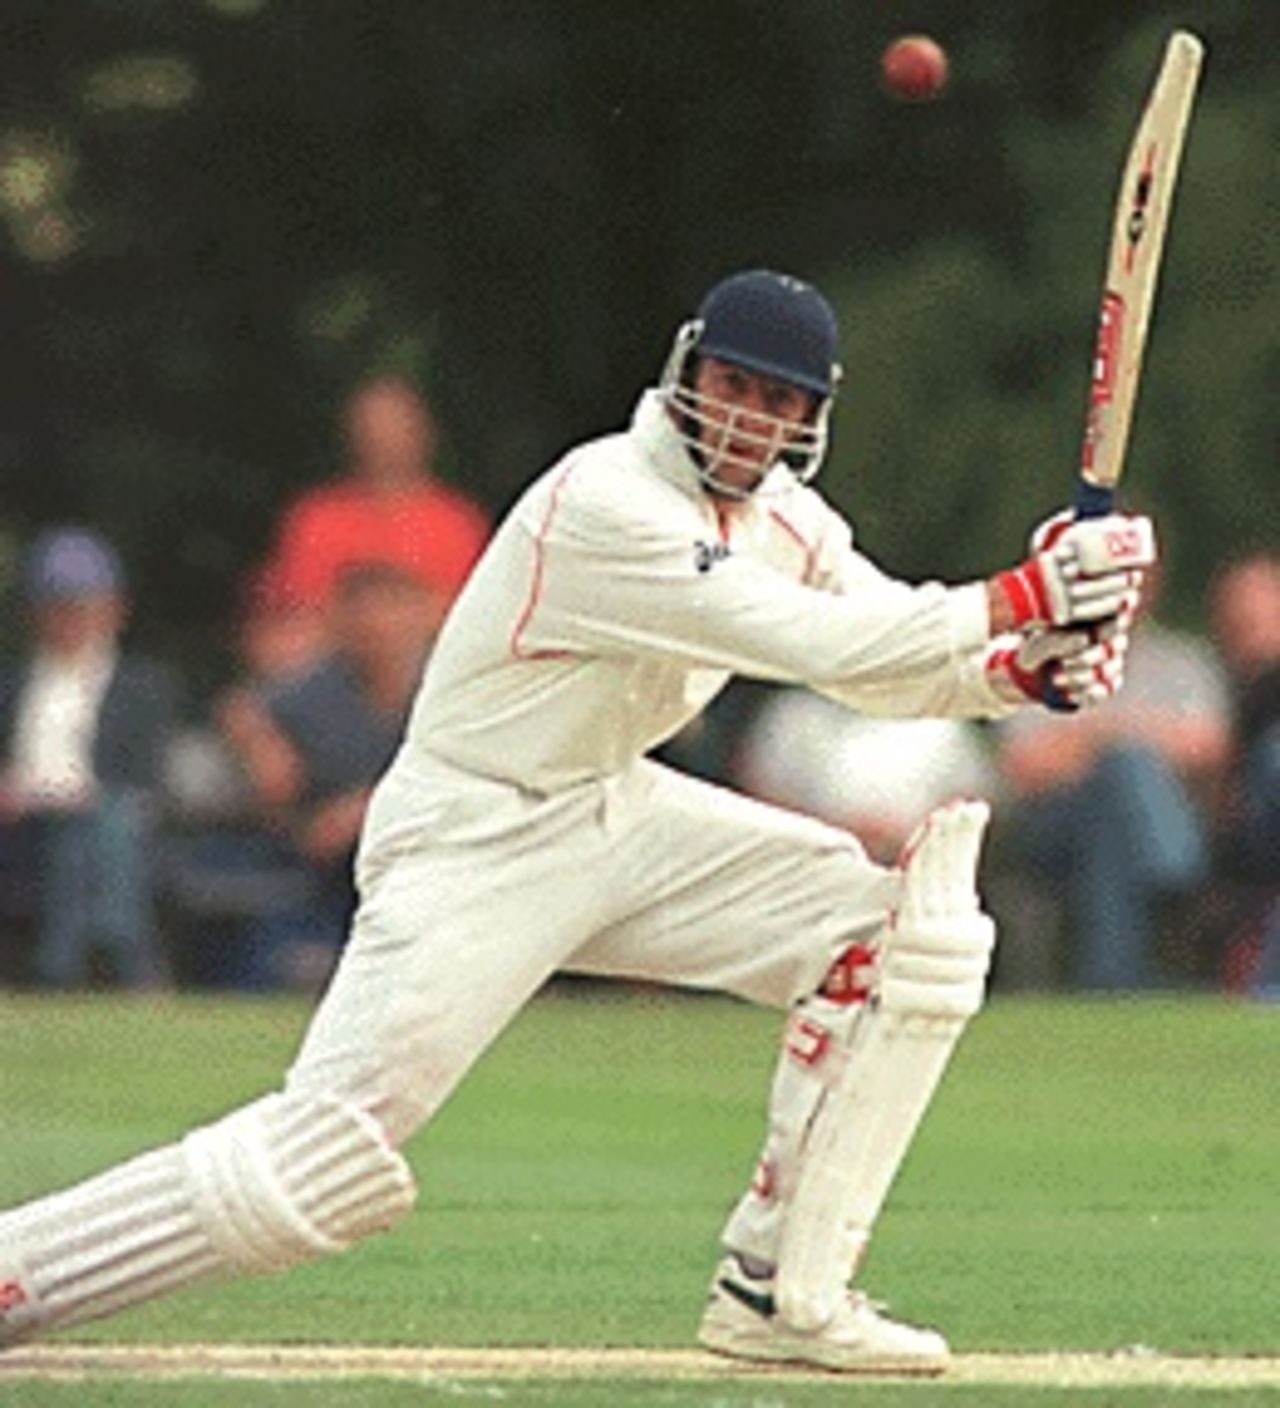 Mike Watkinson with a cover drive, Hertfordshire v Lancashire, NatWest Trophy, 23  June 1999